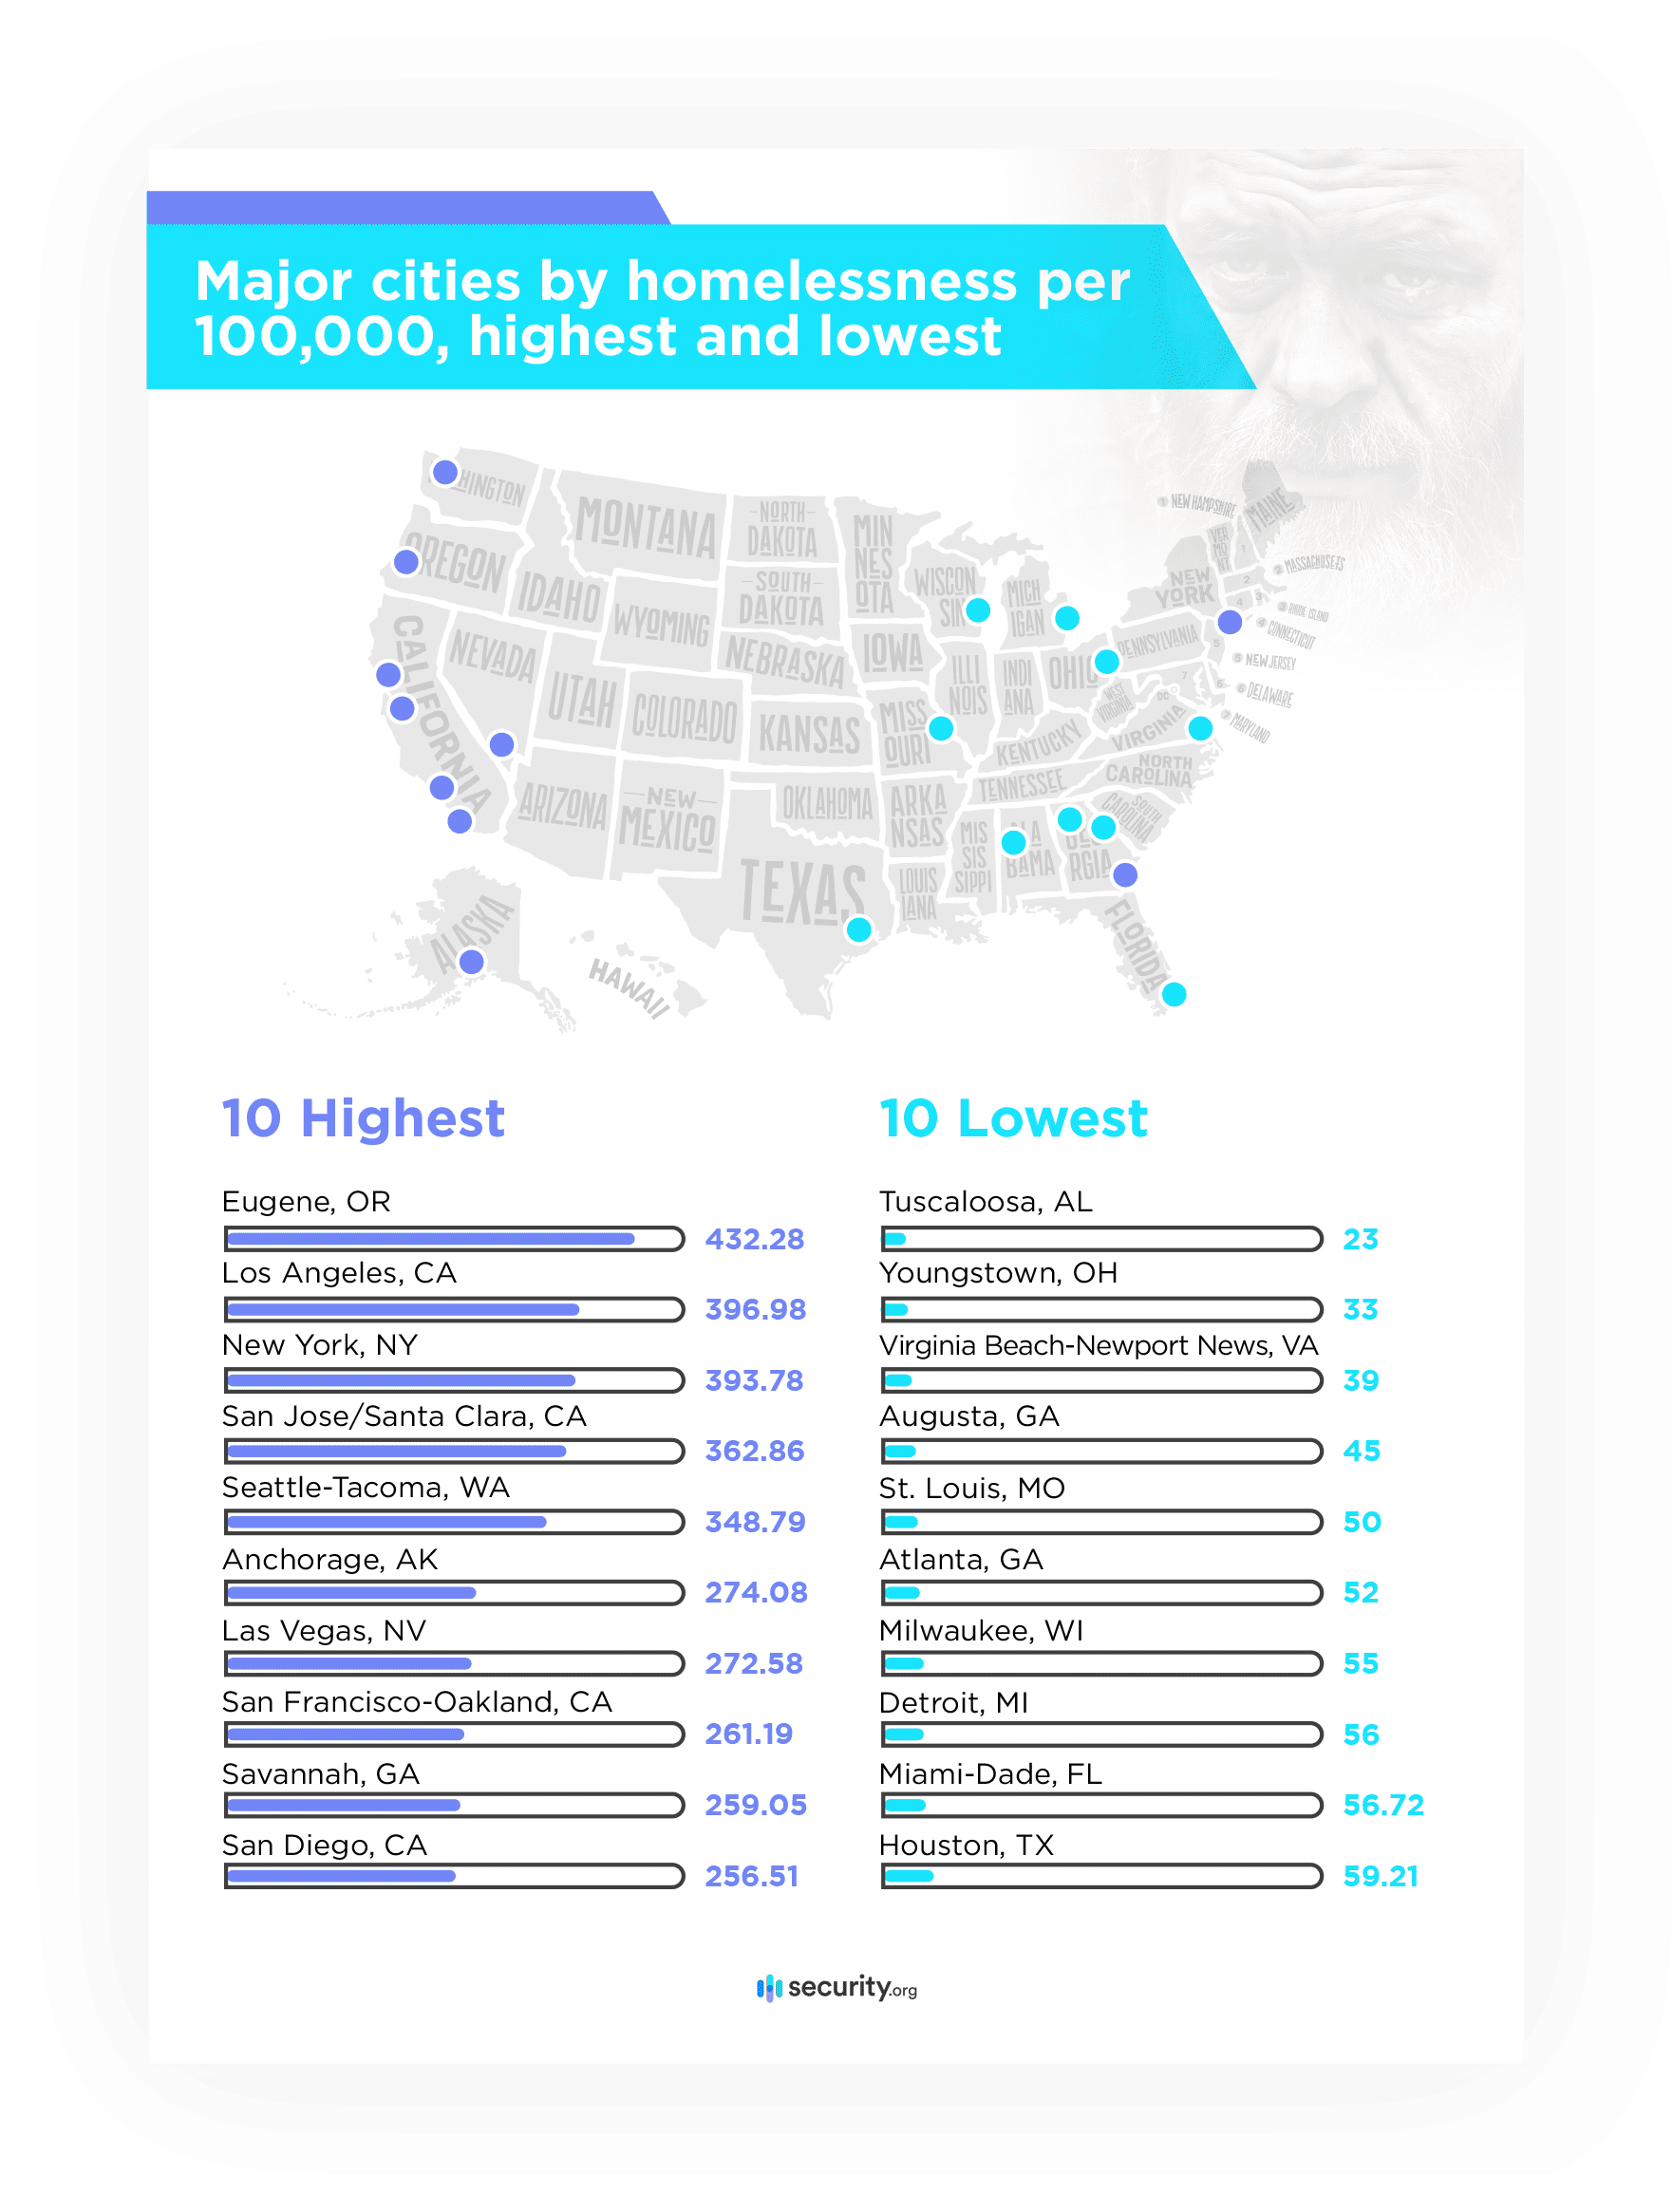 Major cities by homelessness per 100k, highest and lowest